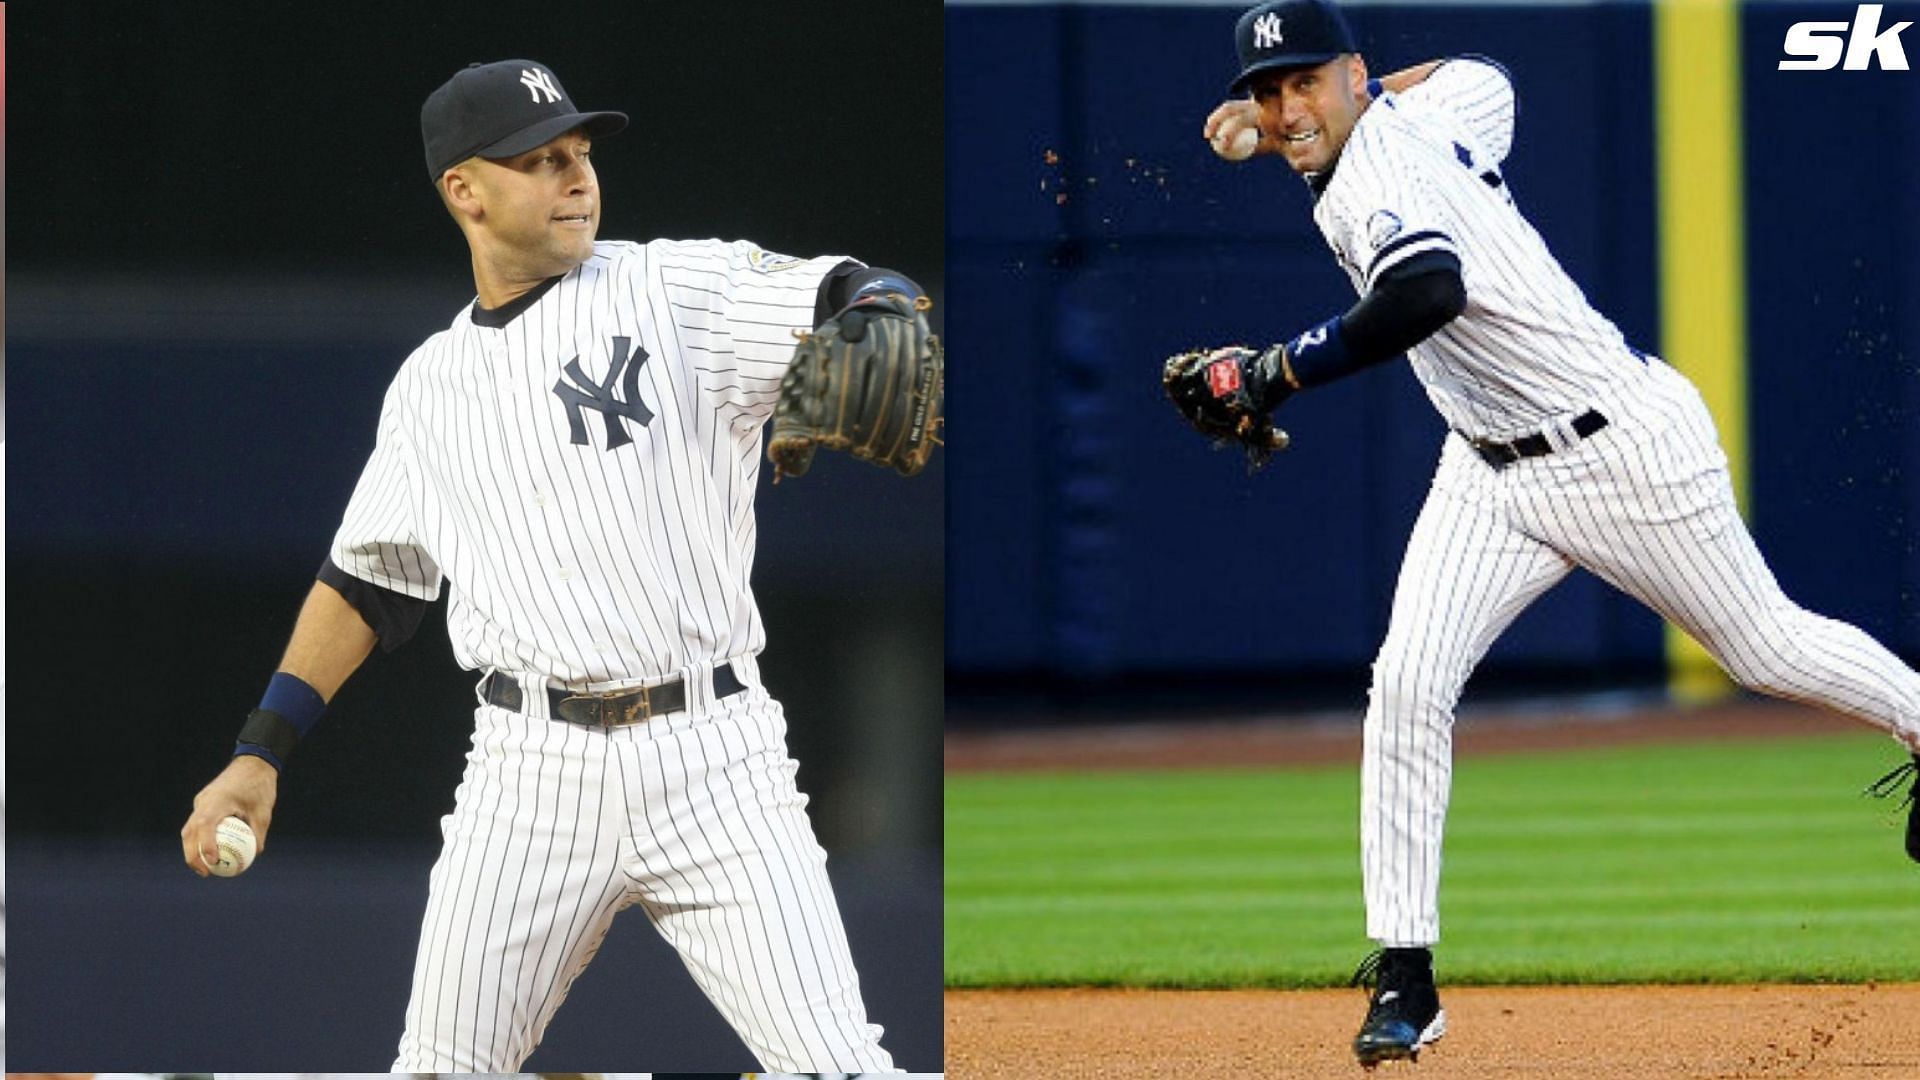 Derek Jeter once shared untold memories about his long-lost high